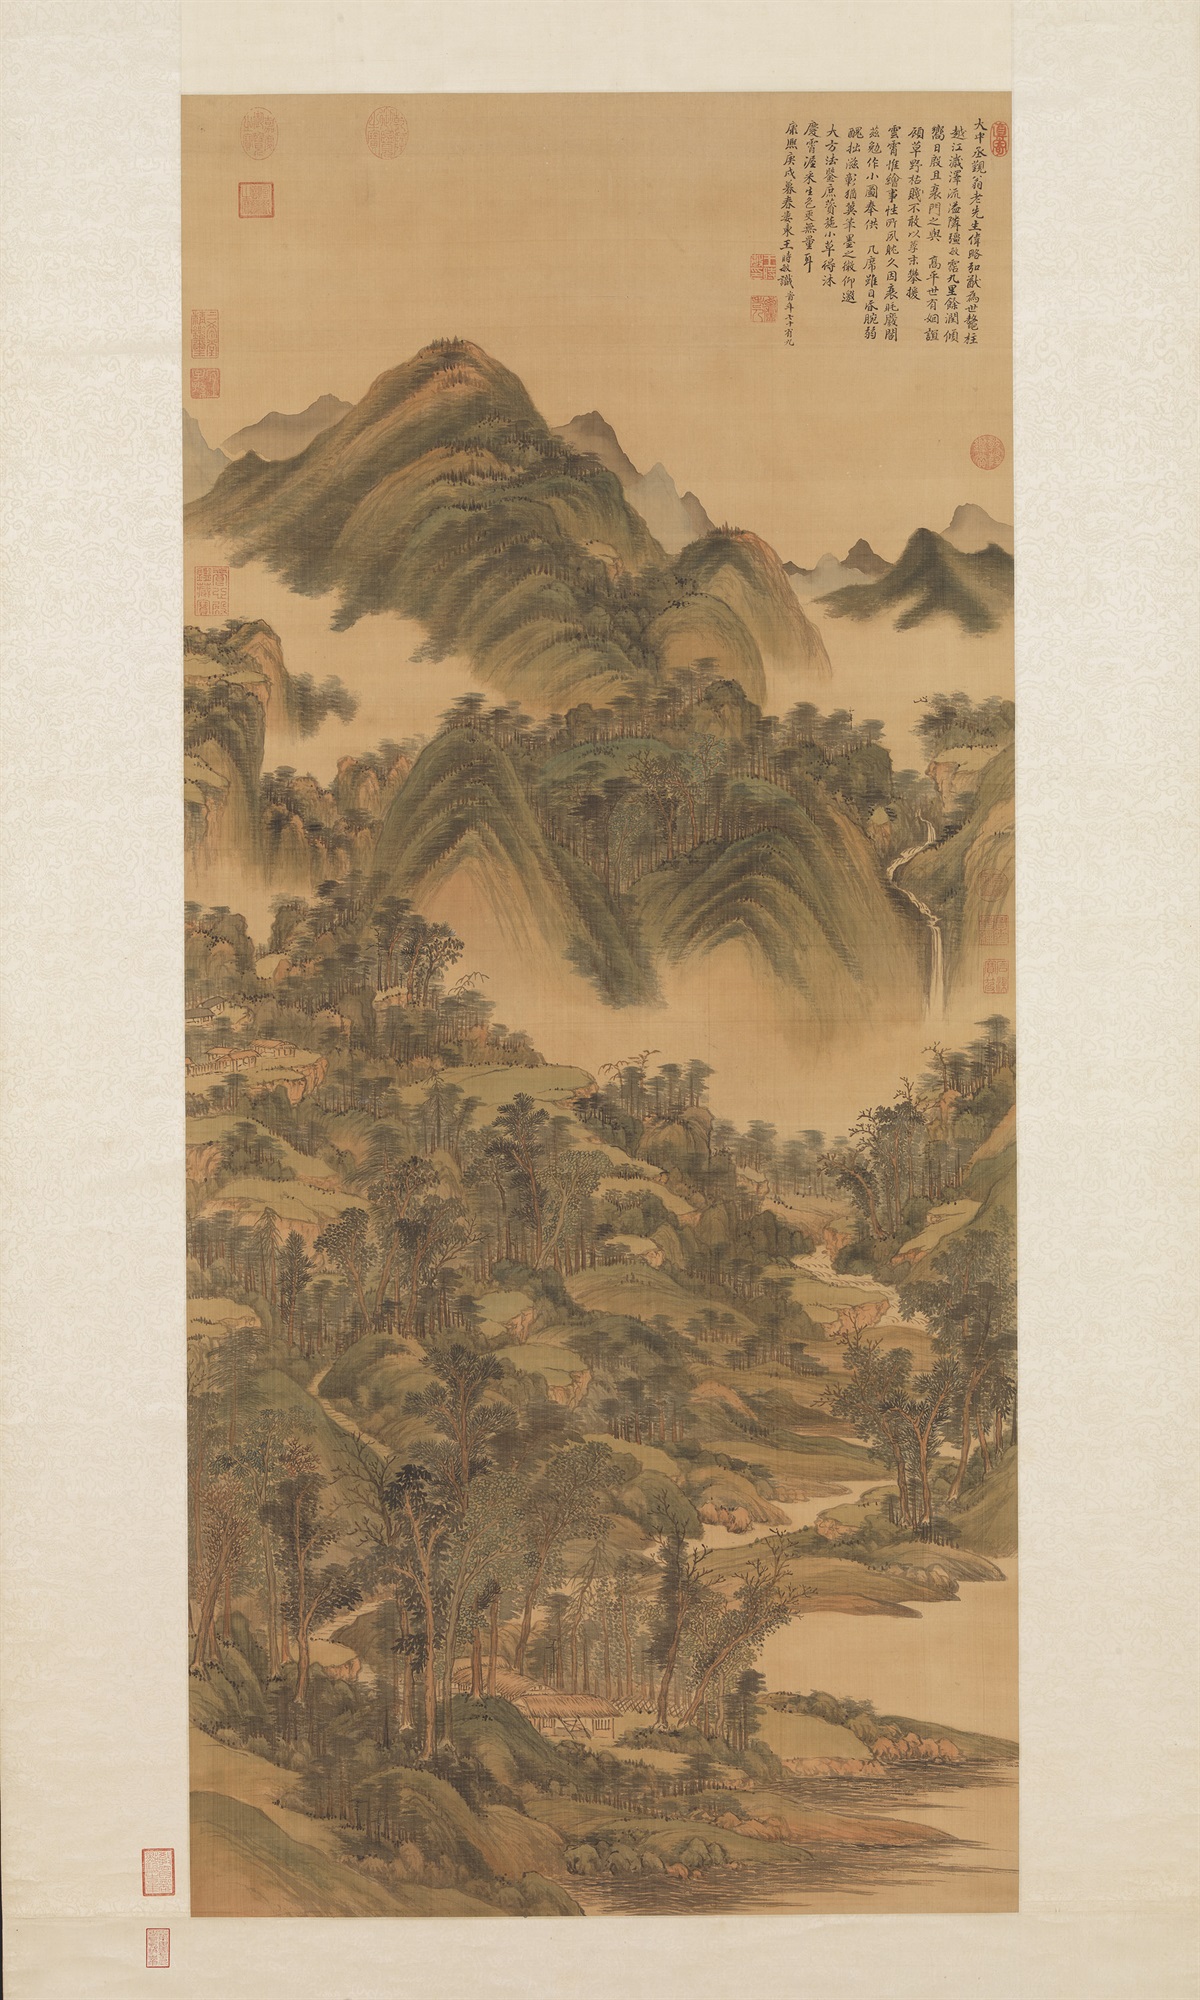 Landscape in the Style of Huang Gongwang, Wang Shimin (1592-1680), Qing dynastypreview